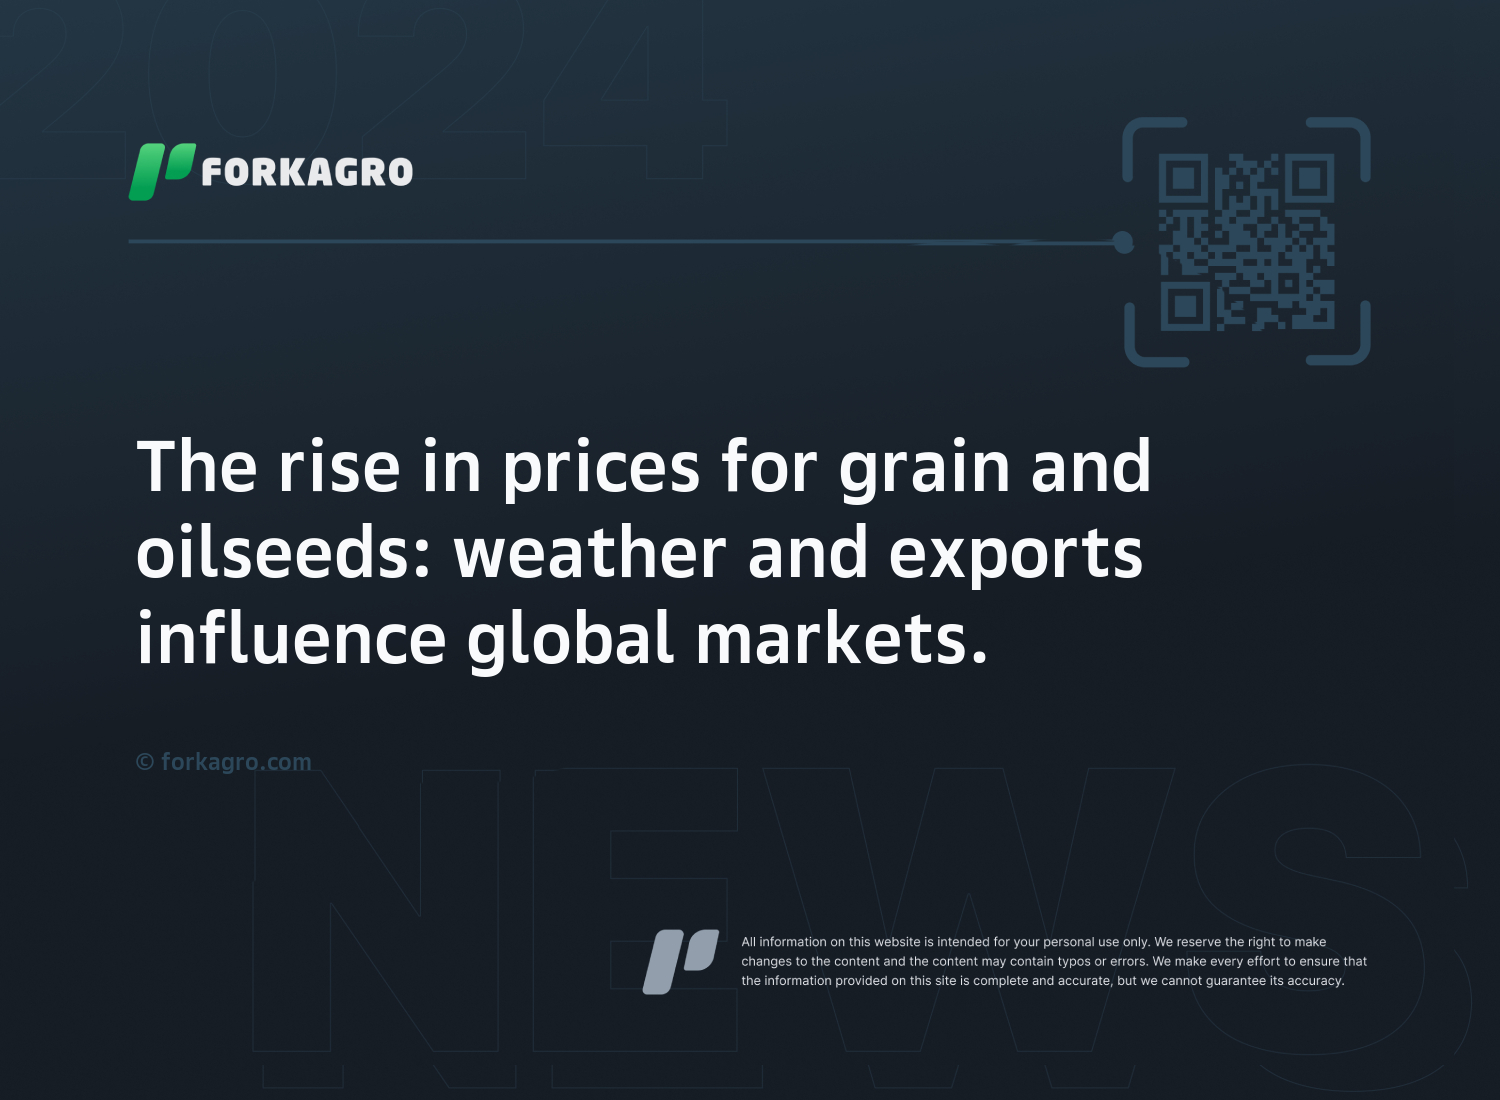 The rise in prices for grain and oilseeds: weather and exports influence global markets.